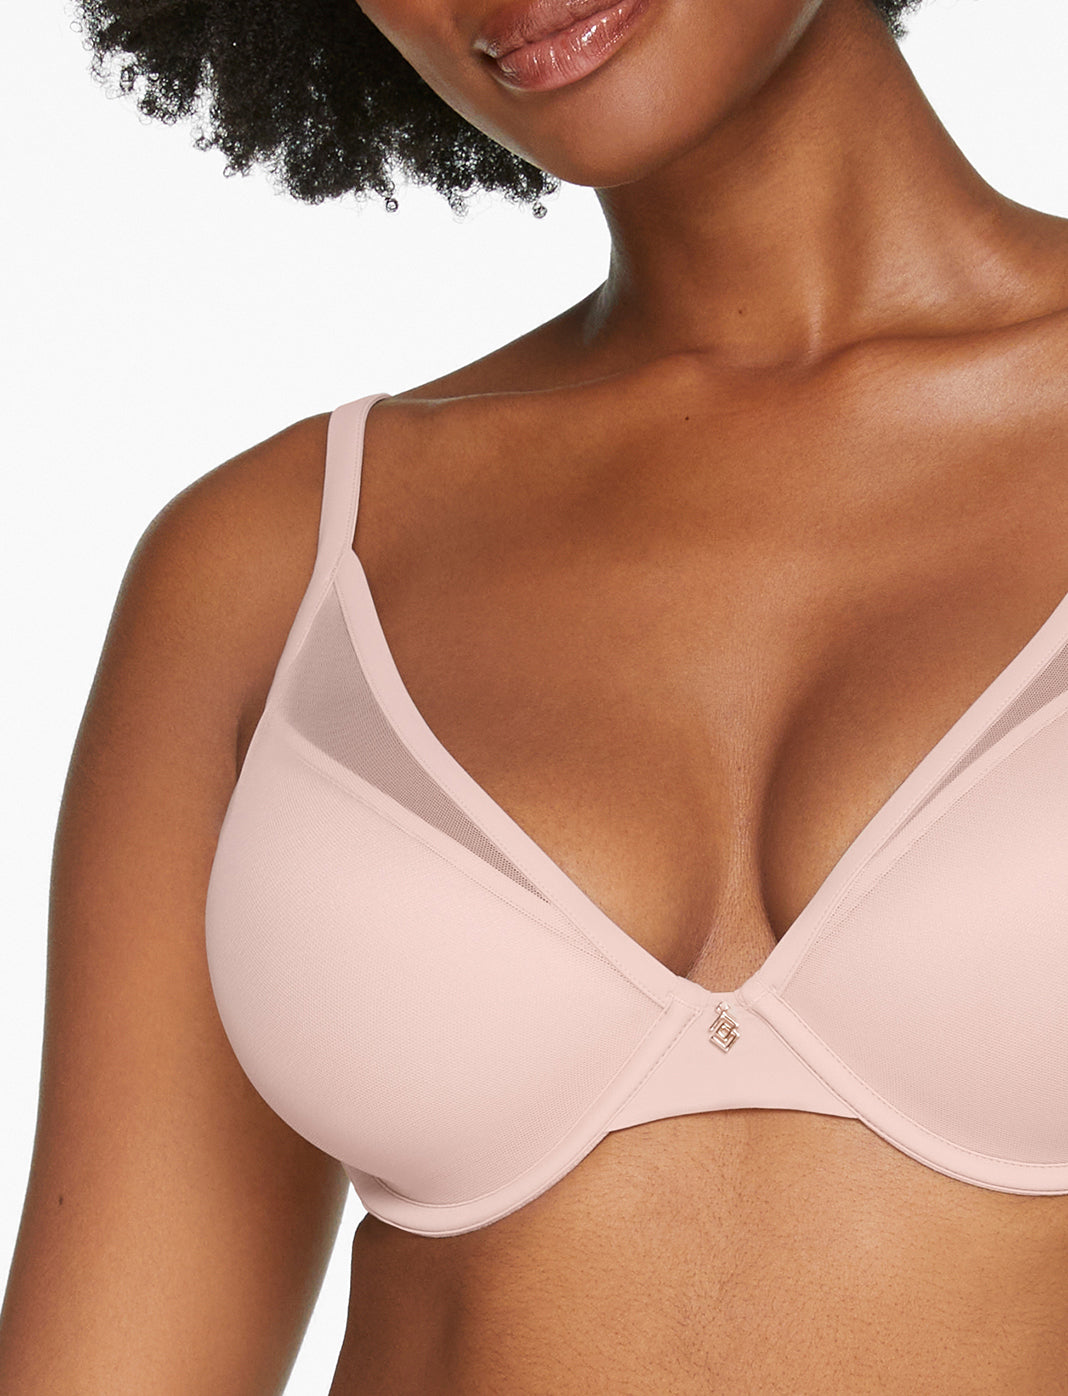 Thirdlove ⬇️ Full Figure Nude Nude 24/7 Classic Contour Plunge Bra Size 32F  Tan - $27 (62% Off Retail) - From MCI